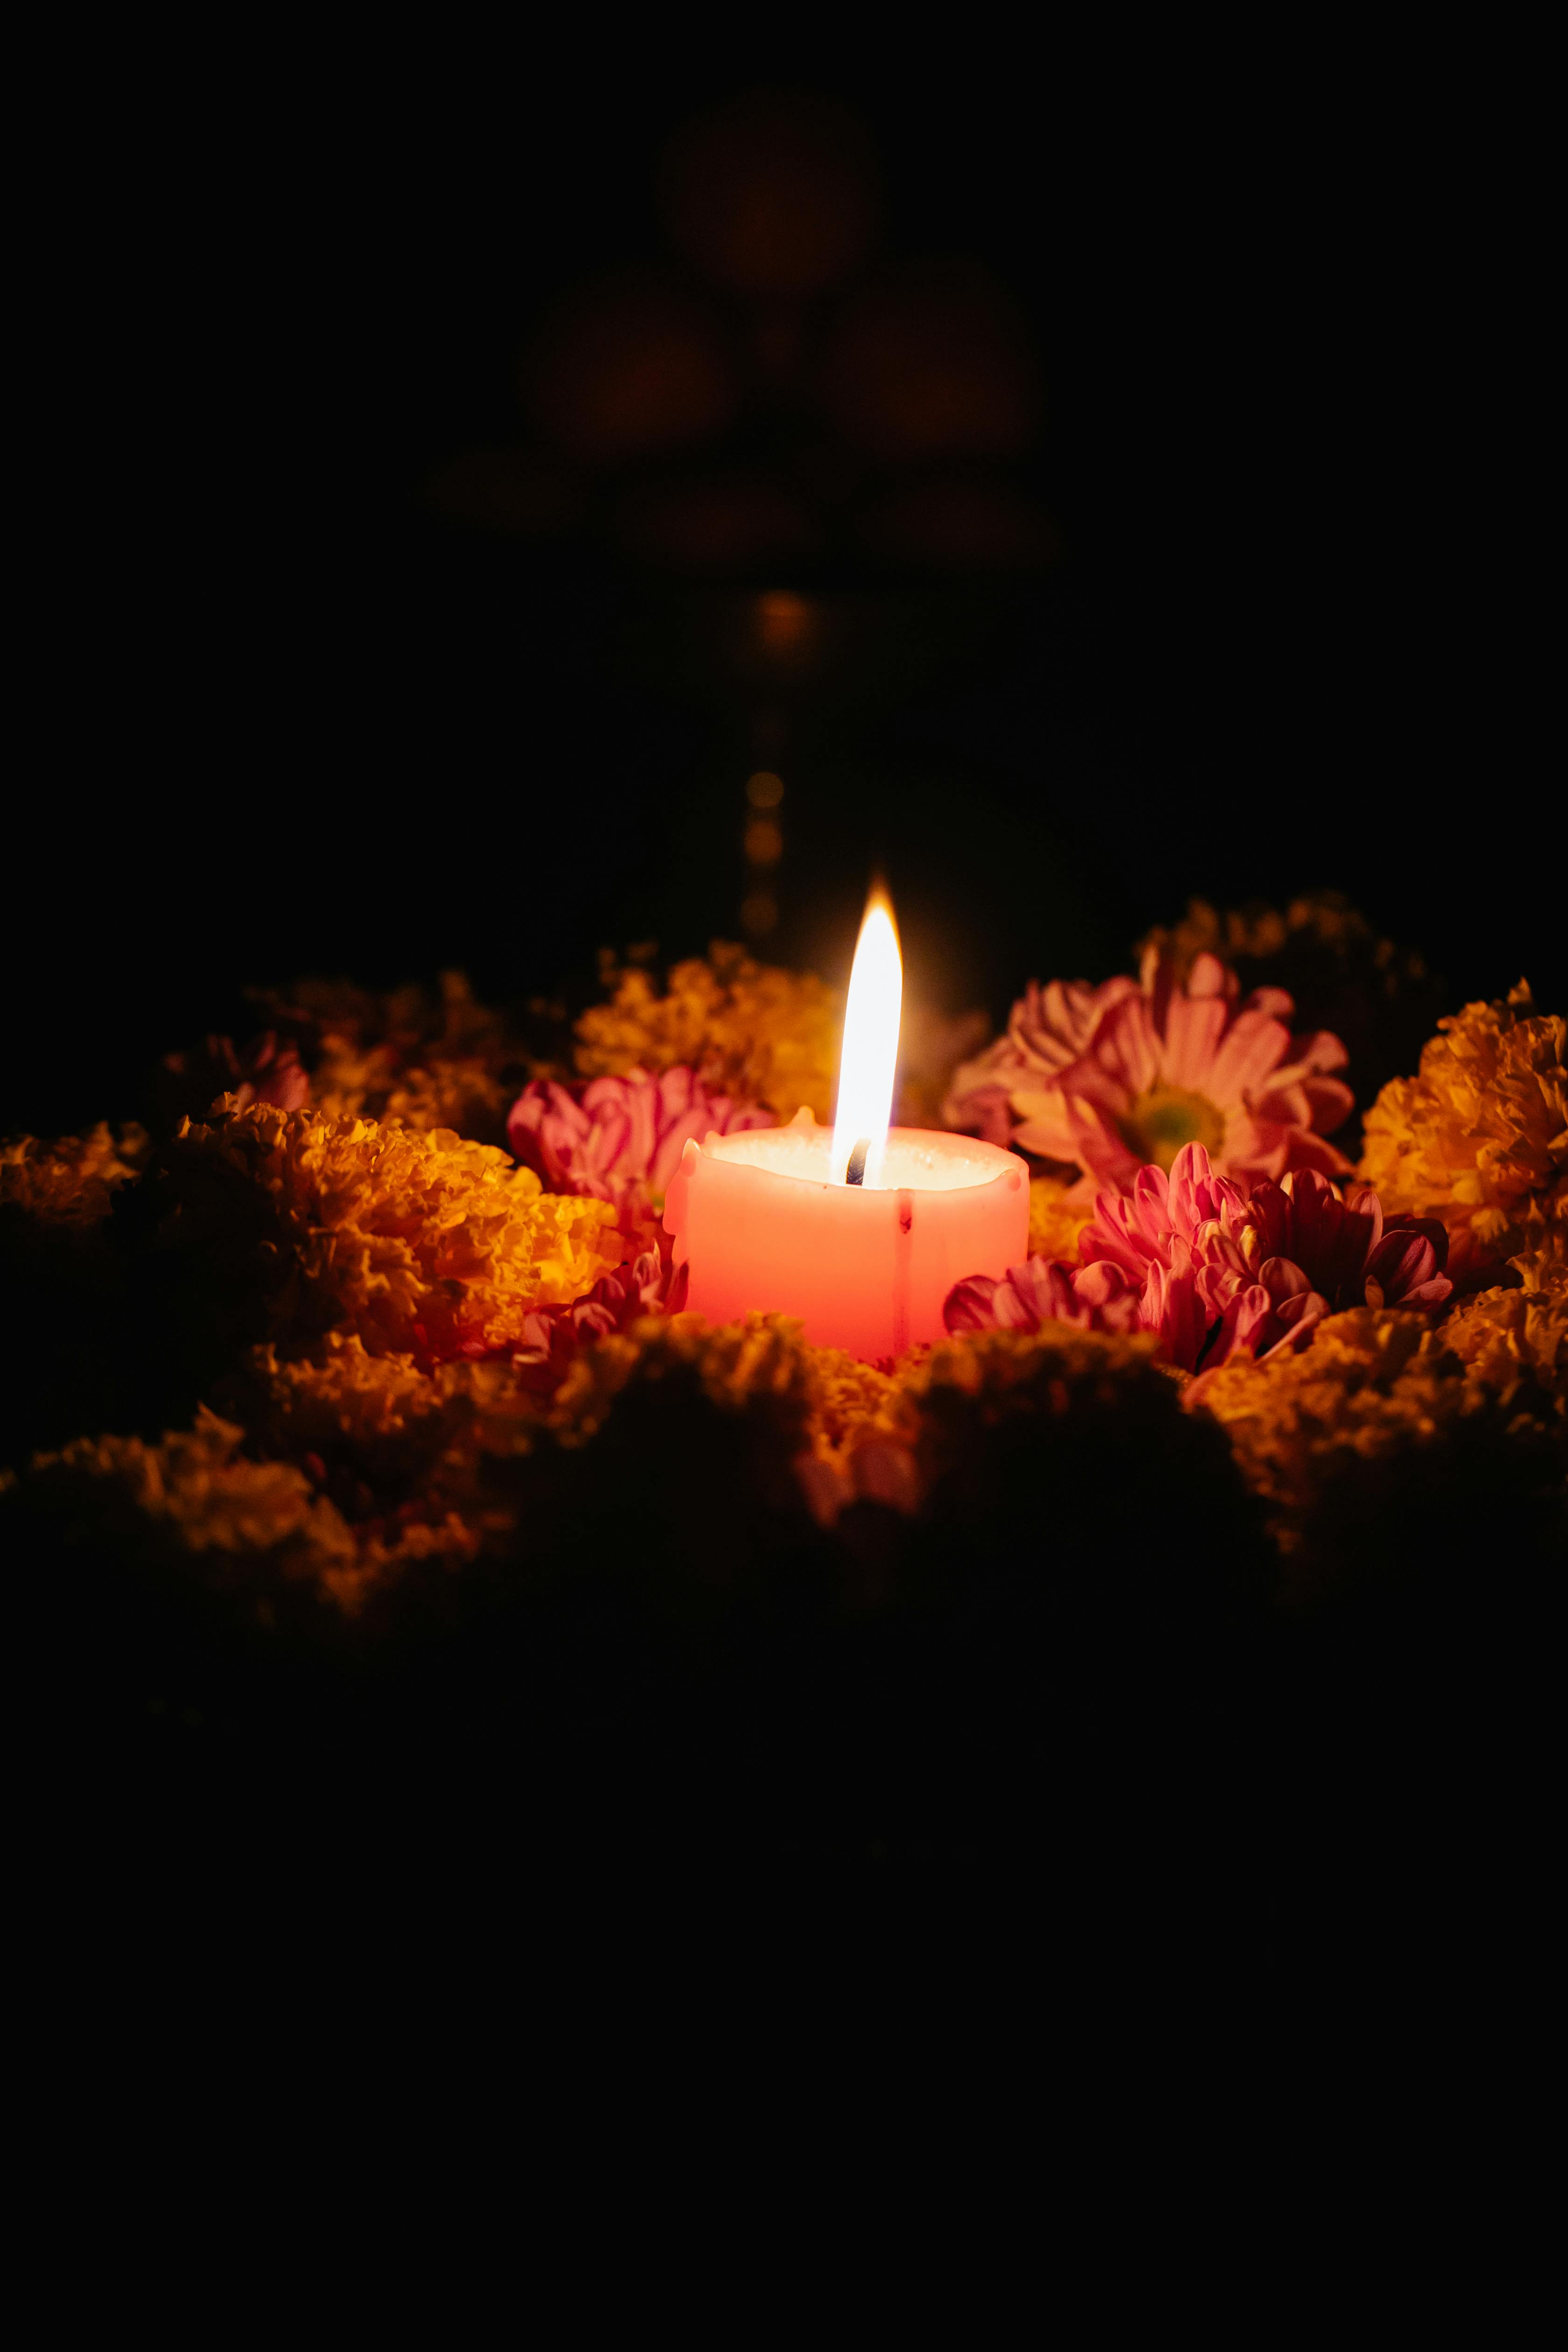 Lighting Candle Pictures | Download Free Images on Unsplash